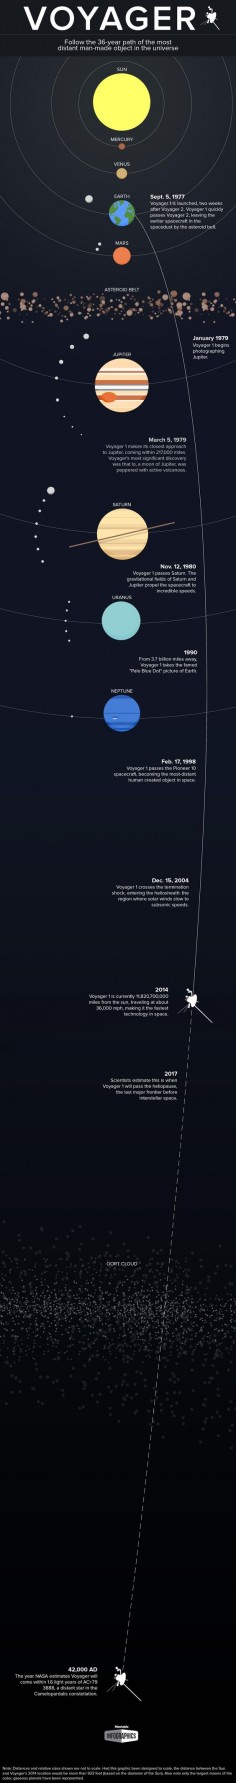 To celebrate Voyager's accomplishments and enduring legacy, we've charted some of the spacecraft's biggest moments.